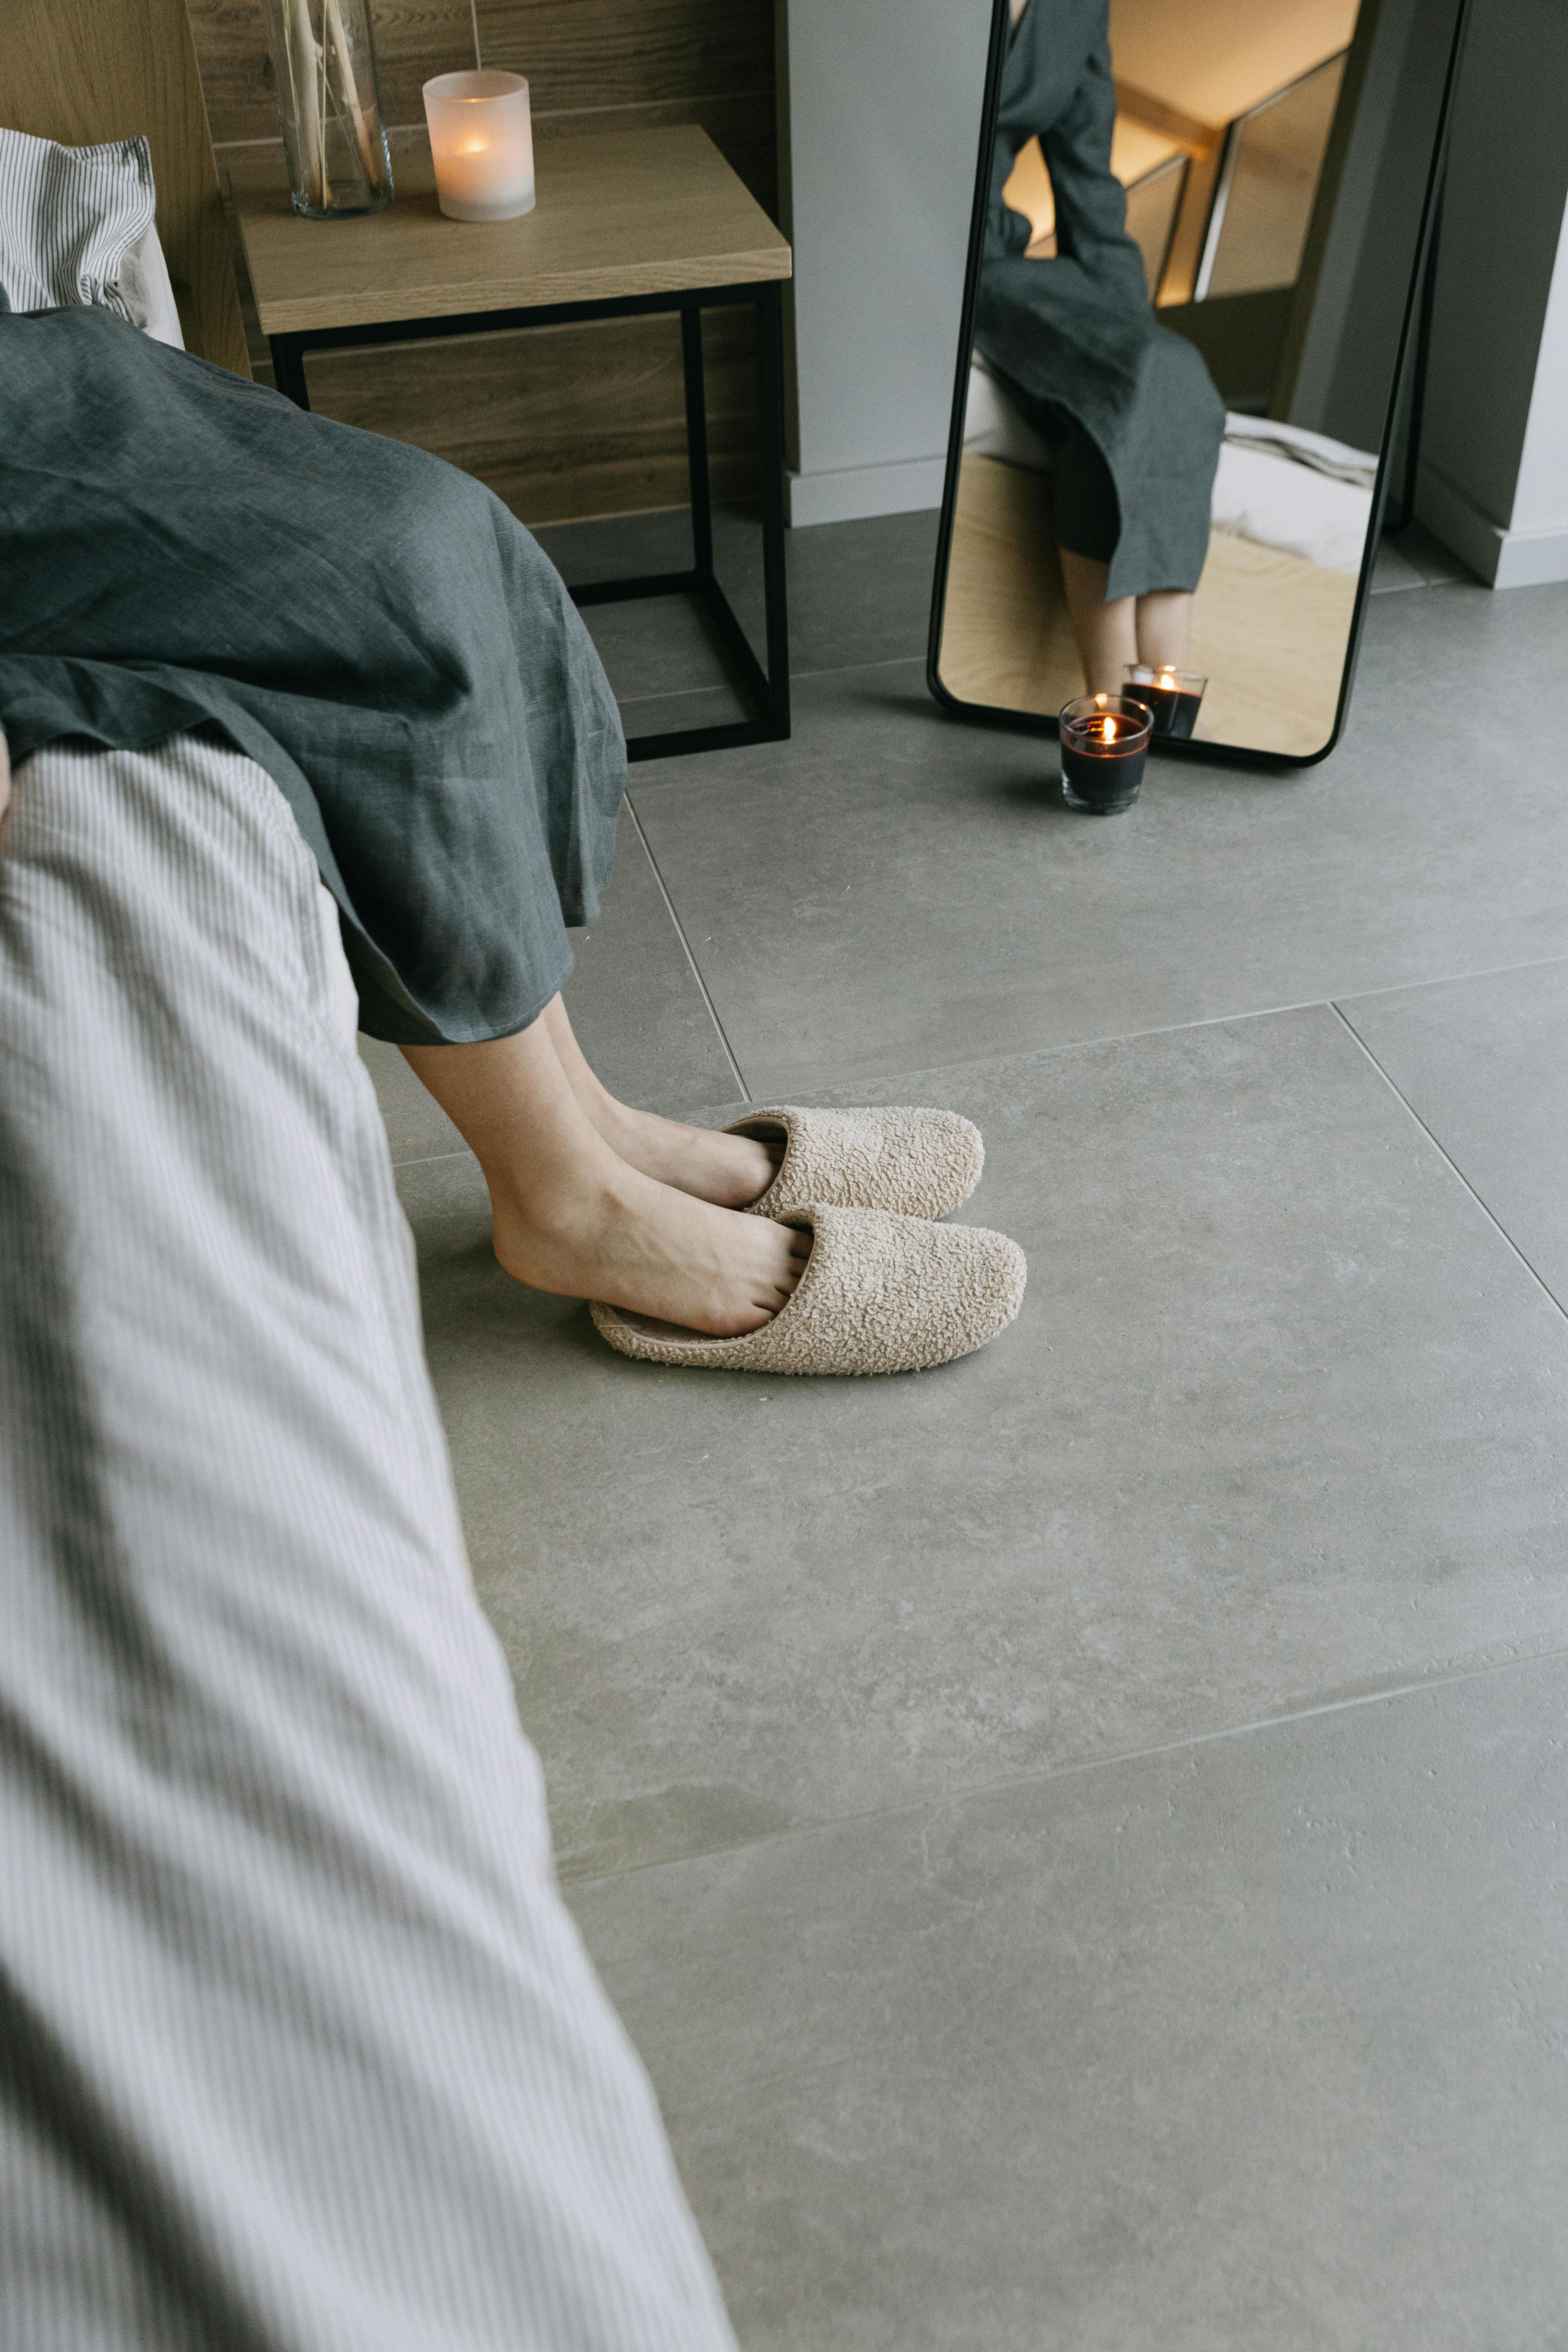 a person wearing an indoor slippers